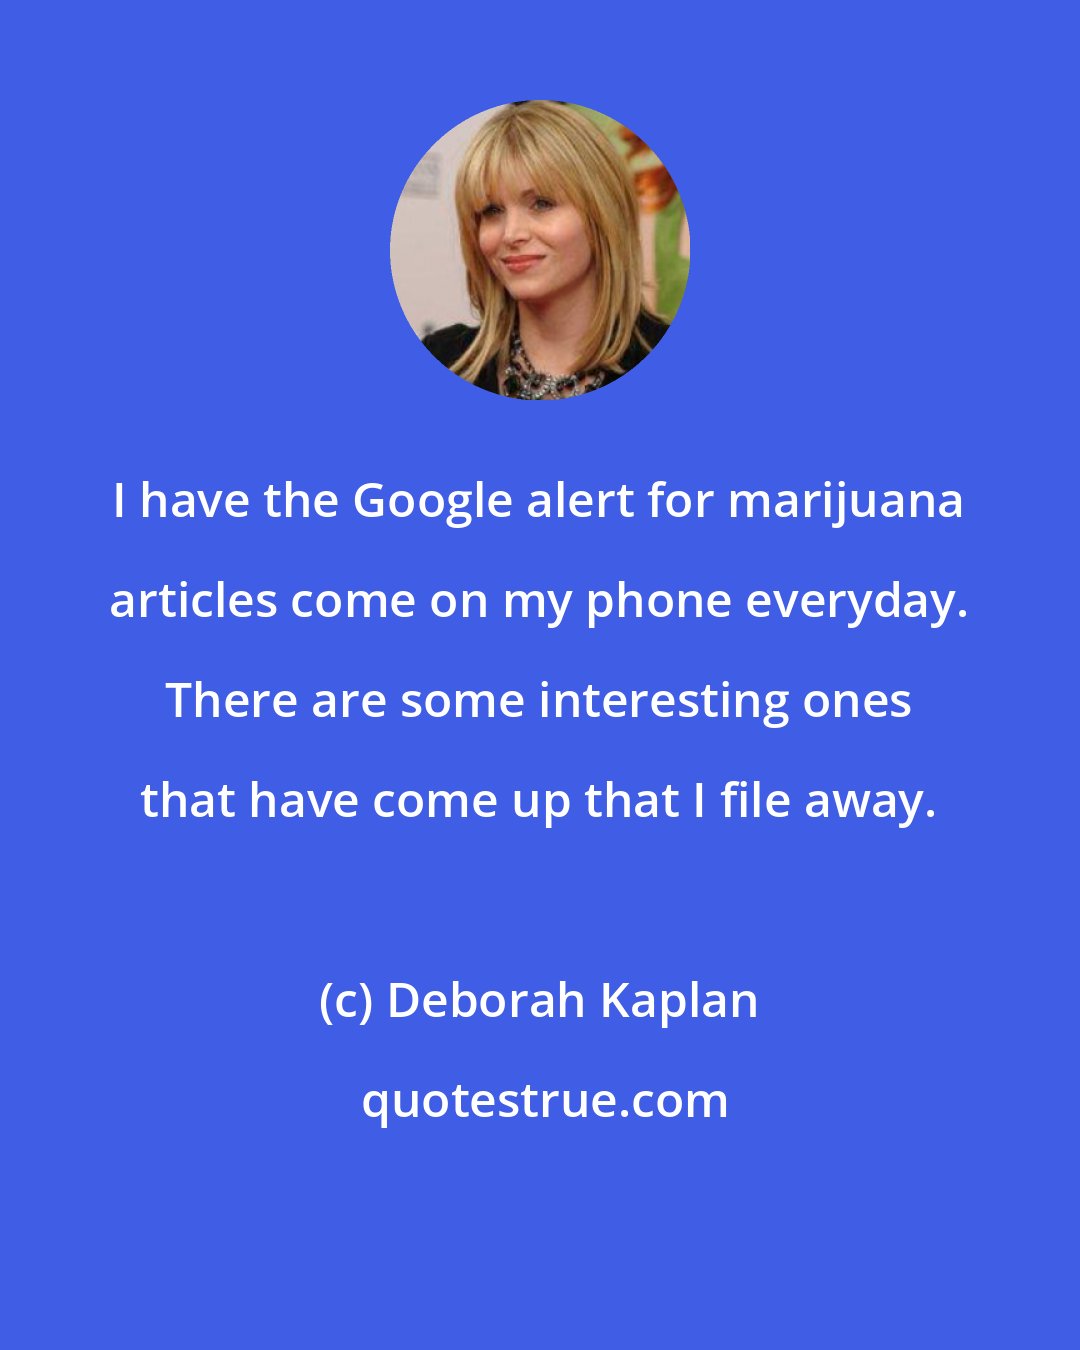 Deborah Kaplan: I have the Google alert for marijuana articles come on my phone everyday. There are some interesting ones that have come up that I file away.